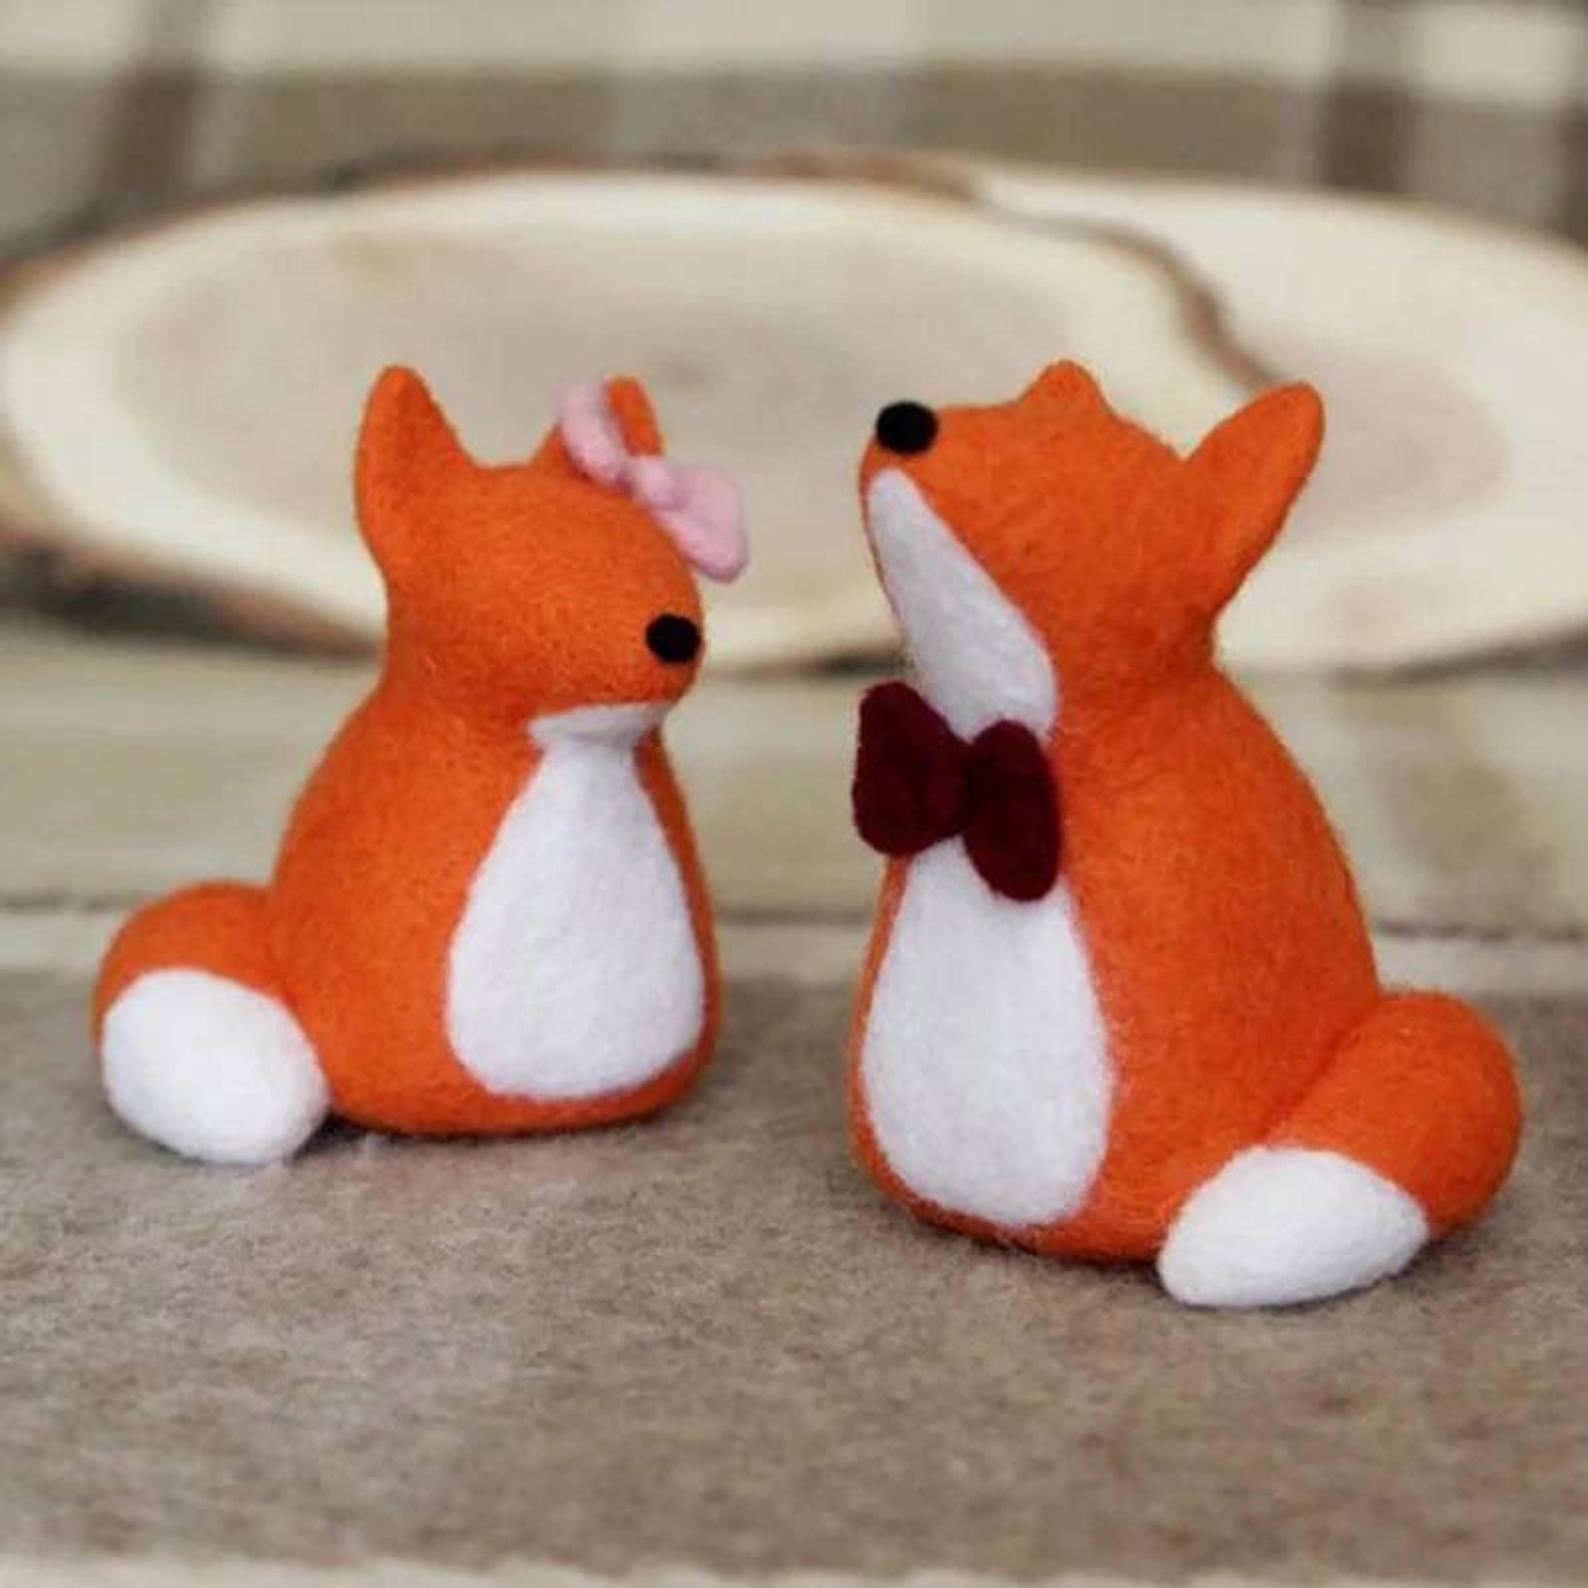 Part 5: Needle felting. Your way to handmade excellence and a world of DIY